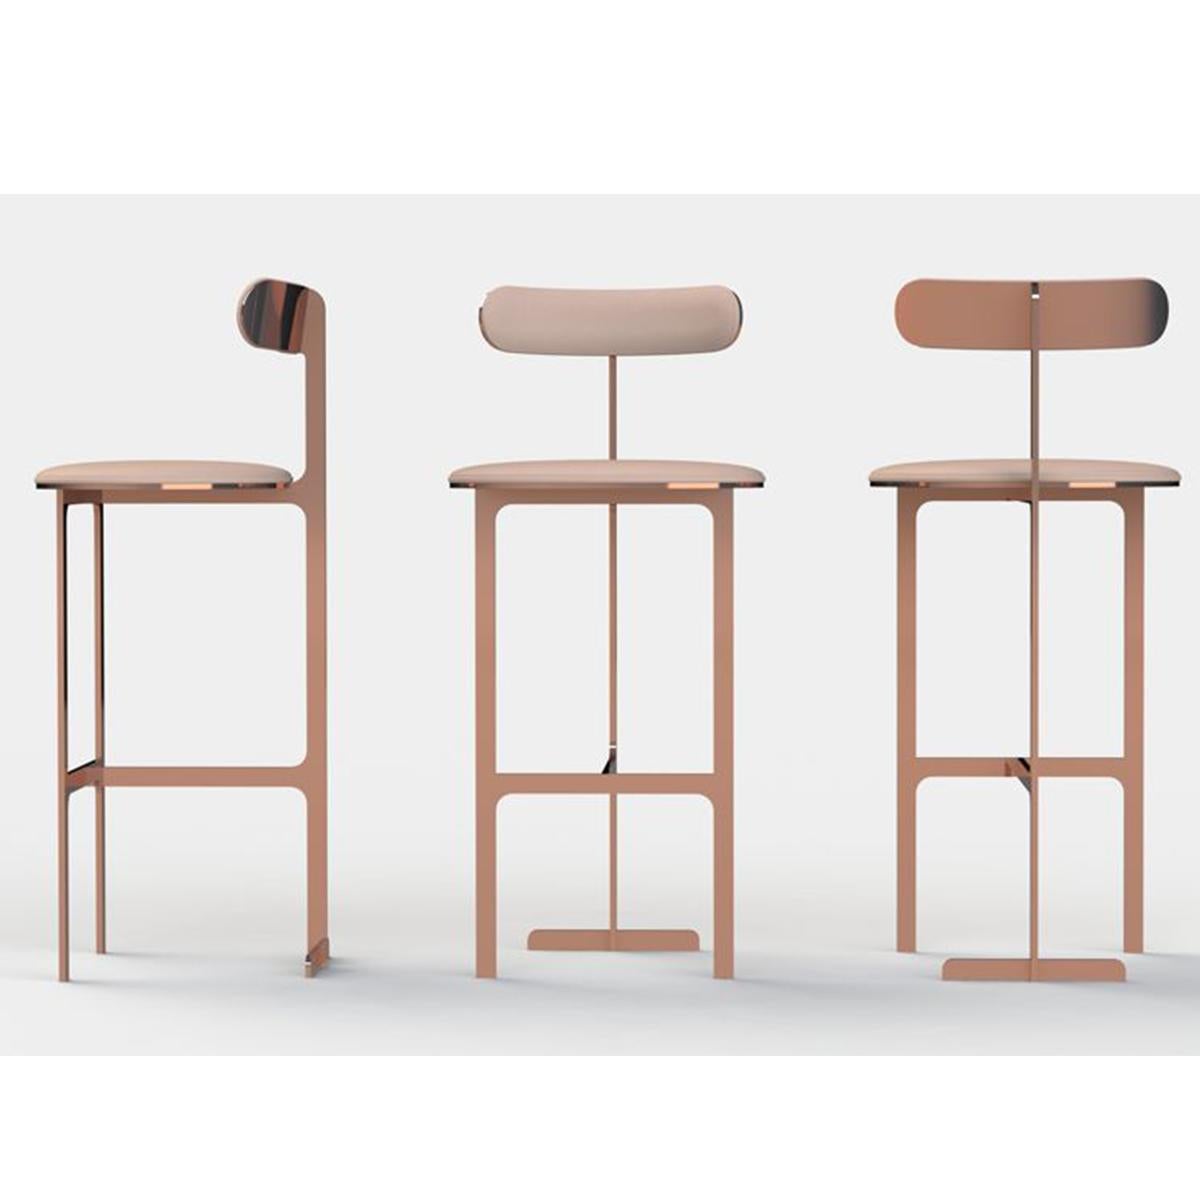 Available immediately from our stock in Paris
Polished copper metal and bone leather upholstered counter stools
designed by Yabu Pushelberg. Condition, excellent. Like new, never used only exposed in design project. One stool has small circular